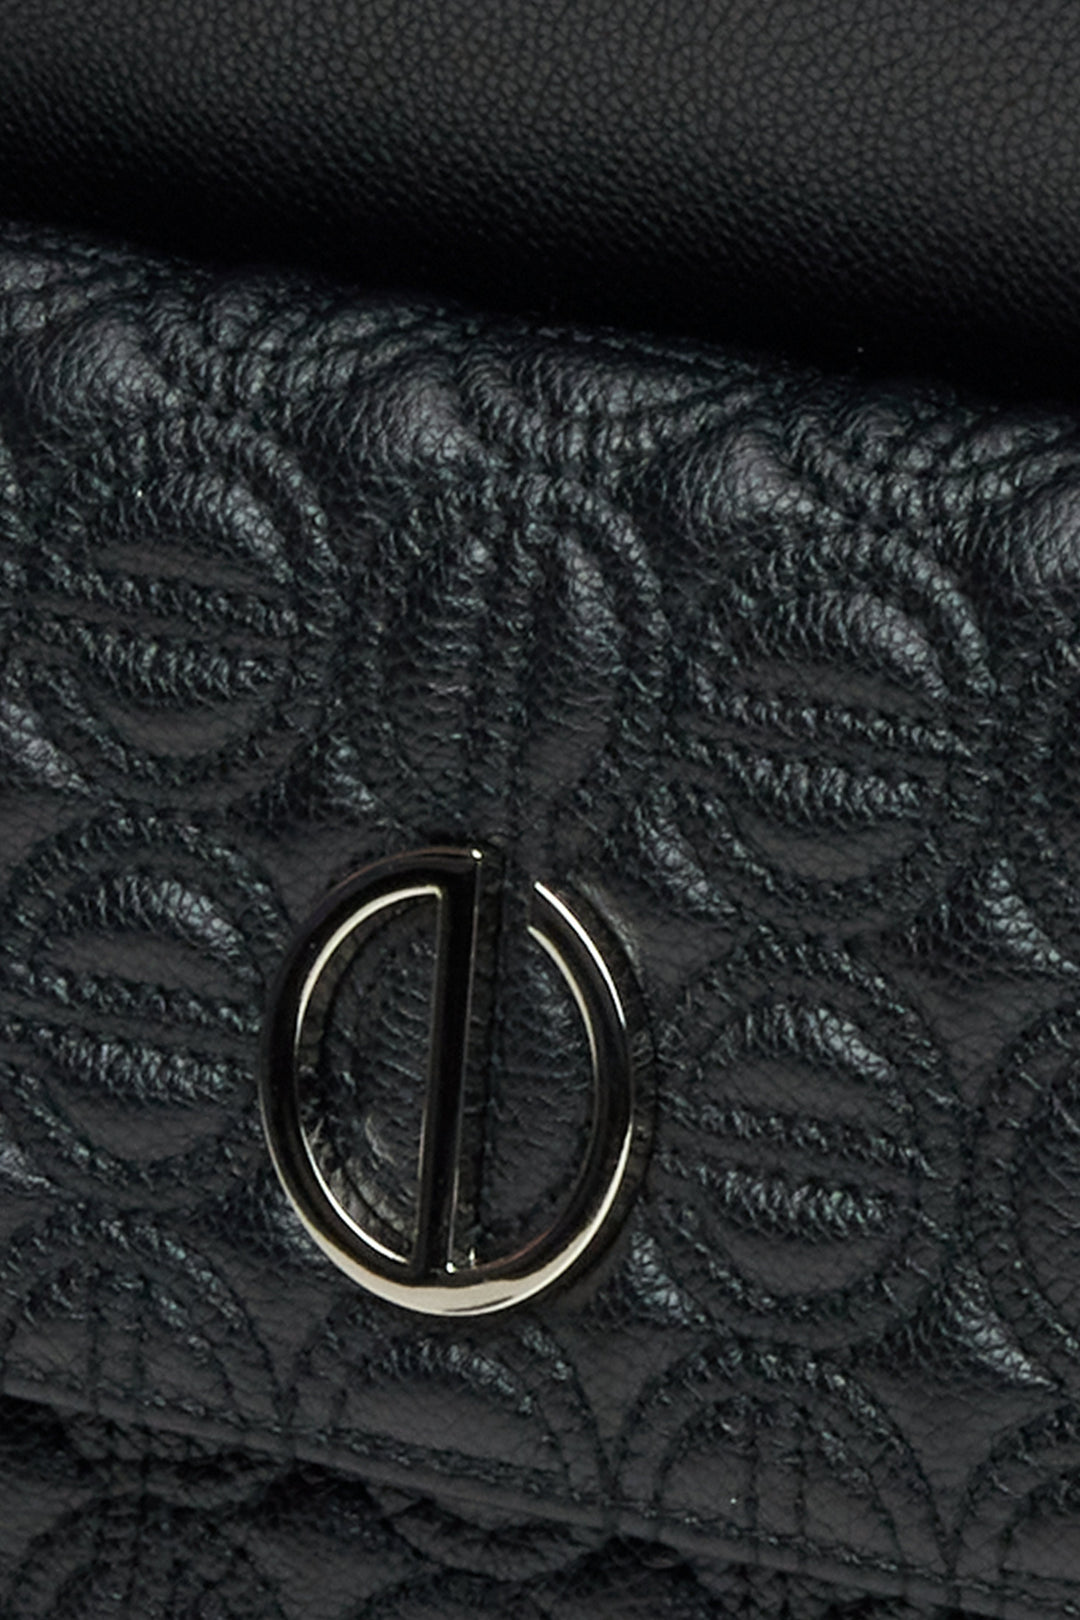 Black leather women's backpack by Estro - close-up on the details.